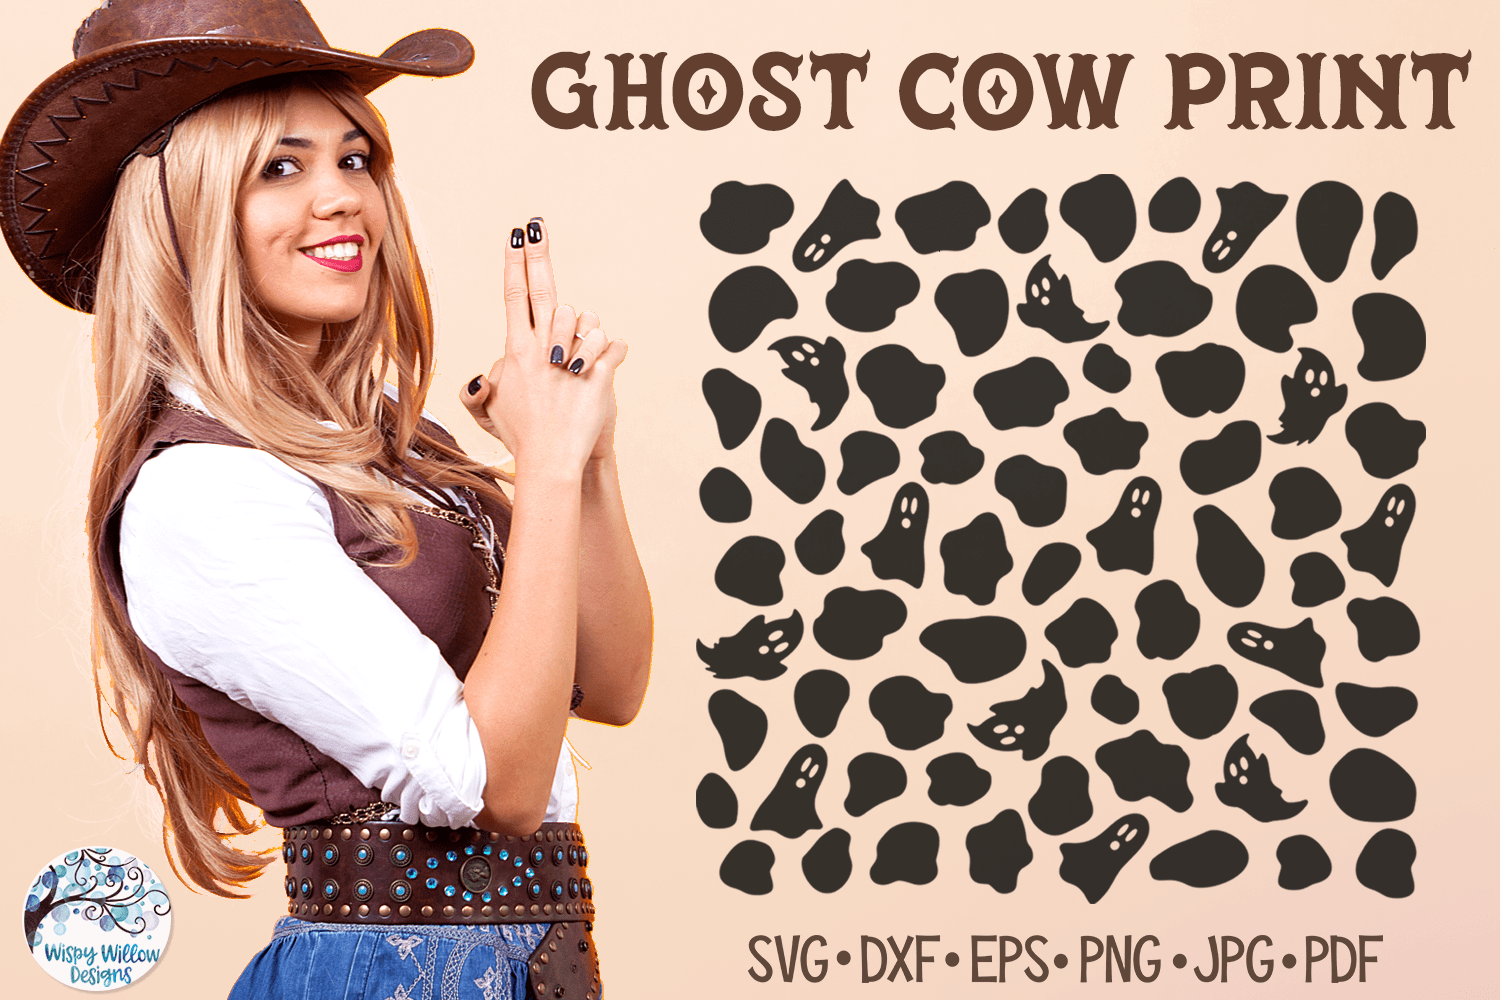 Ghost Cow Print SVG | Halloween Animal Pattern Wispy Willow Designs Company